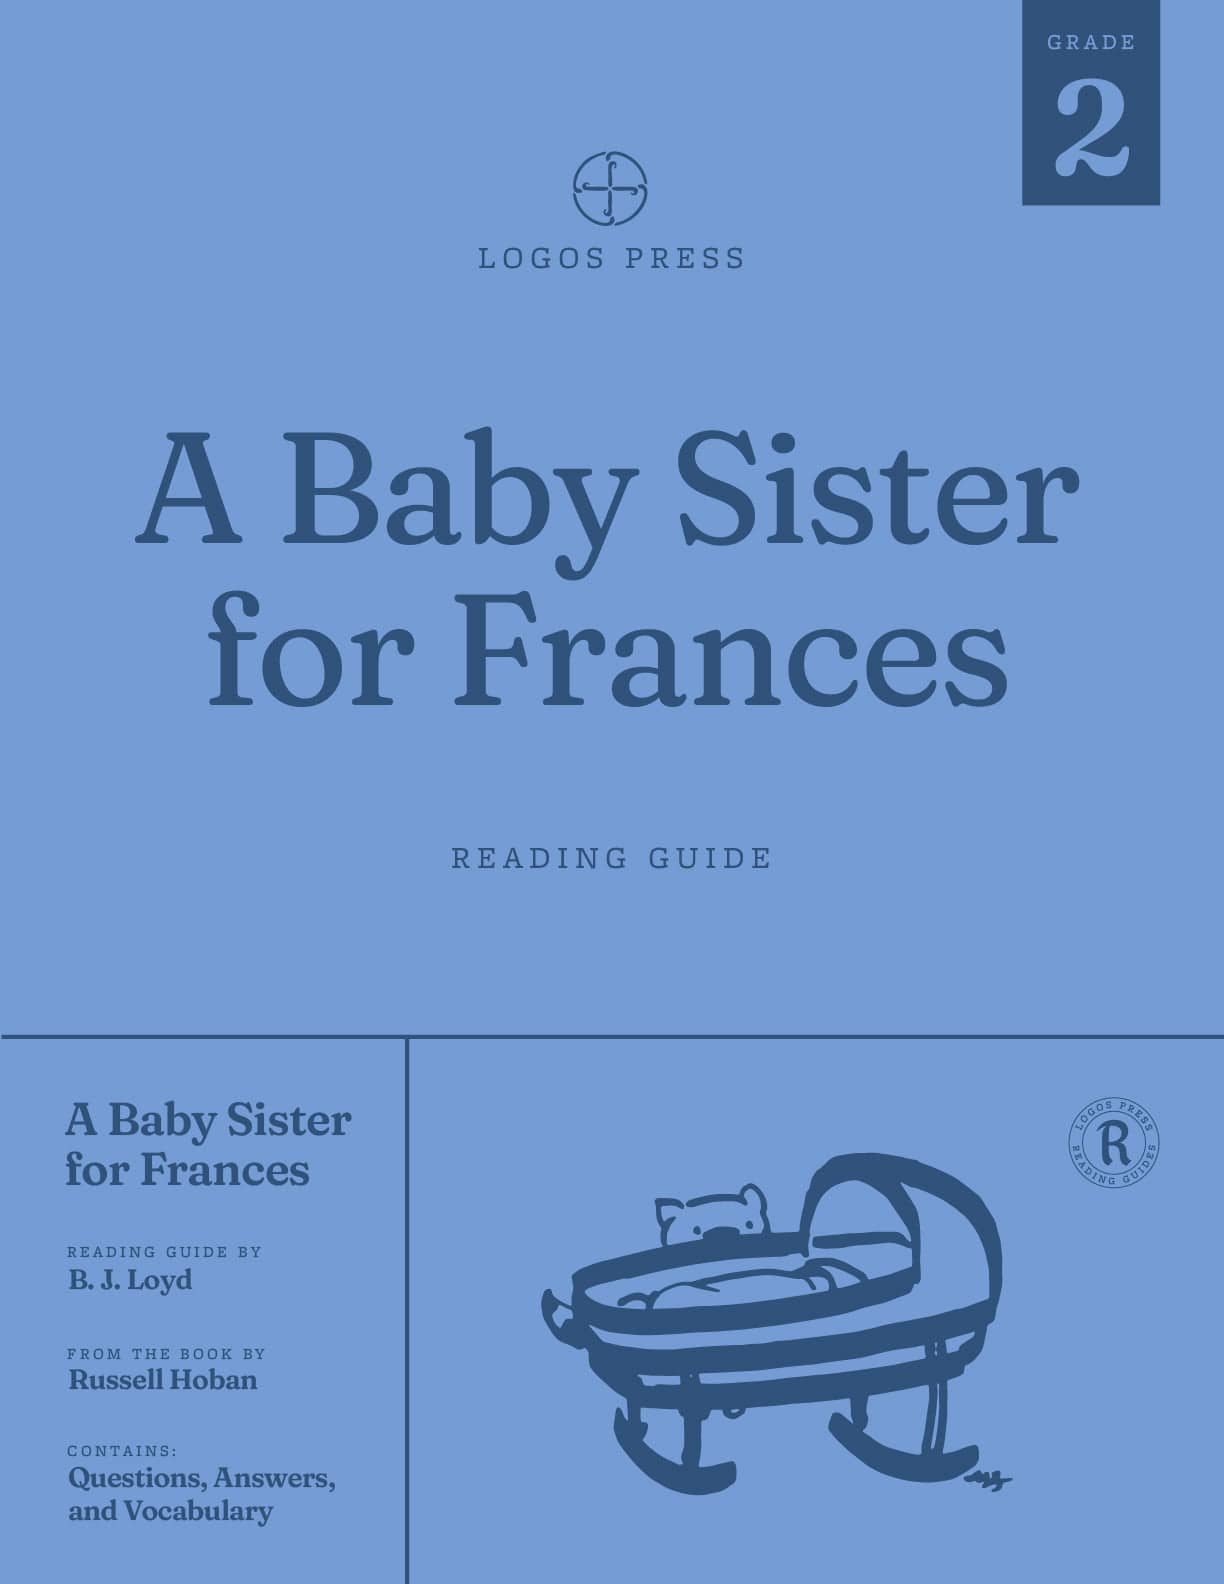 A Baby Sister for Frances - Reading Guide (Download)